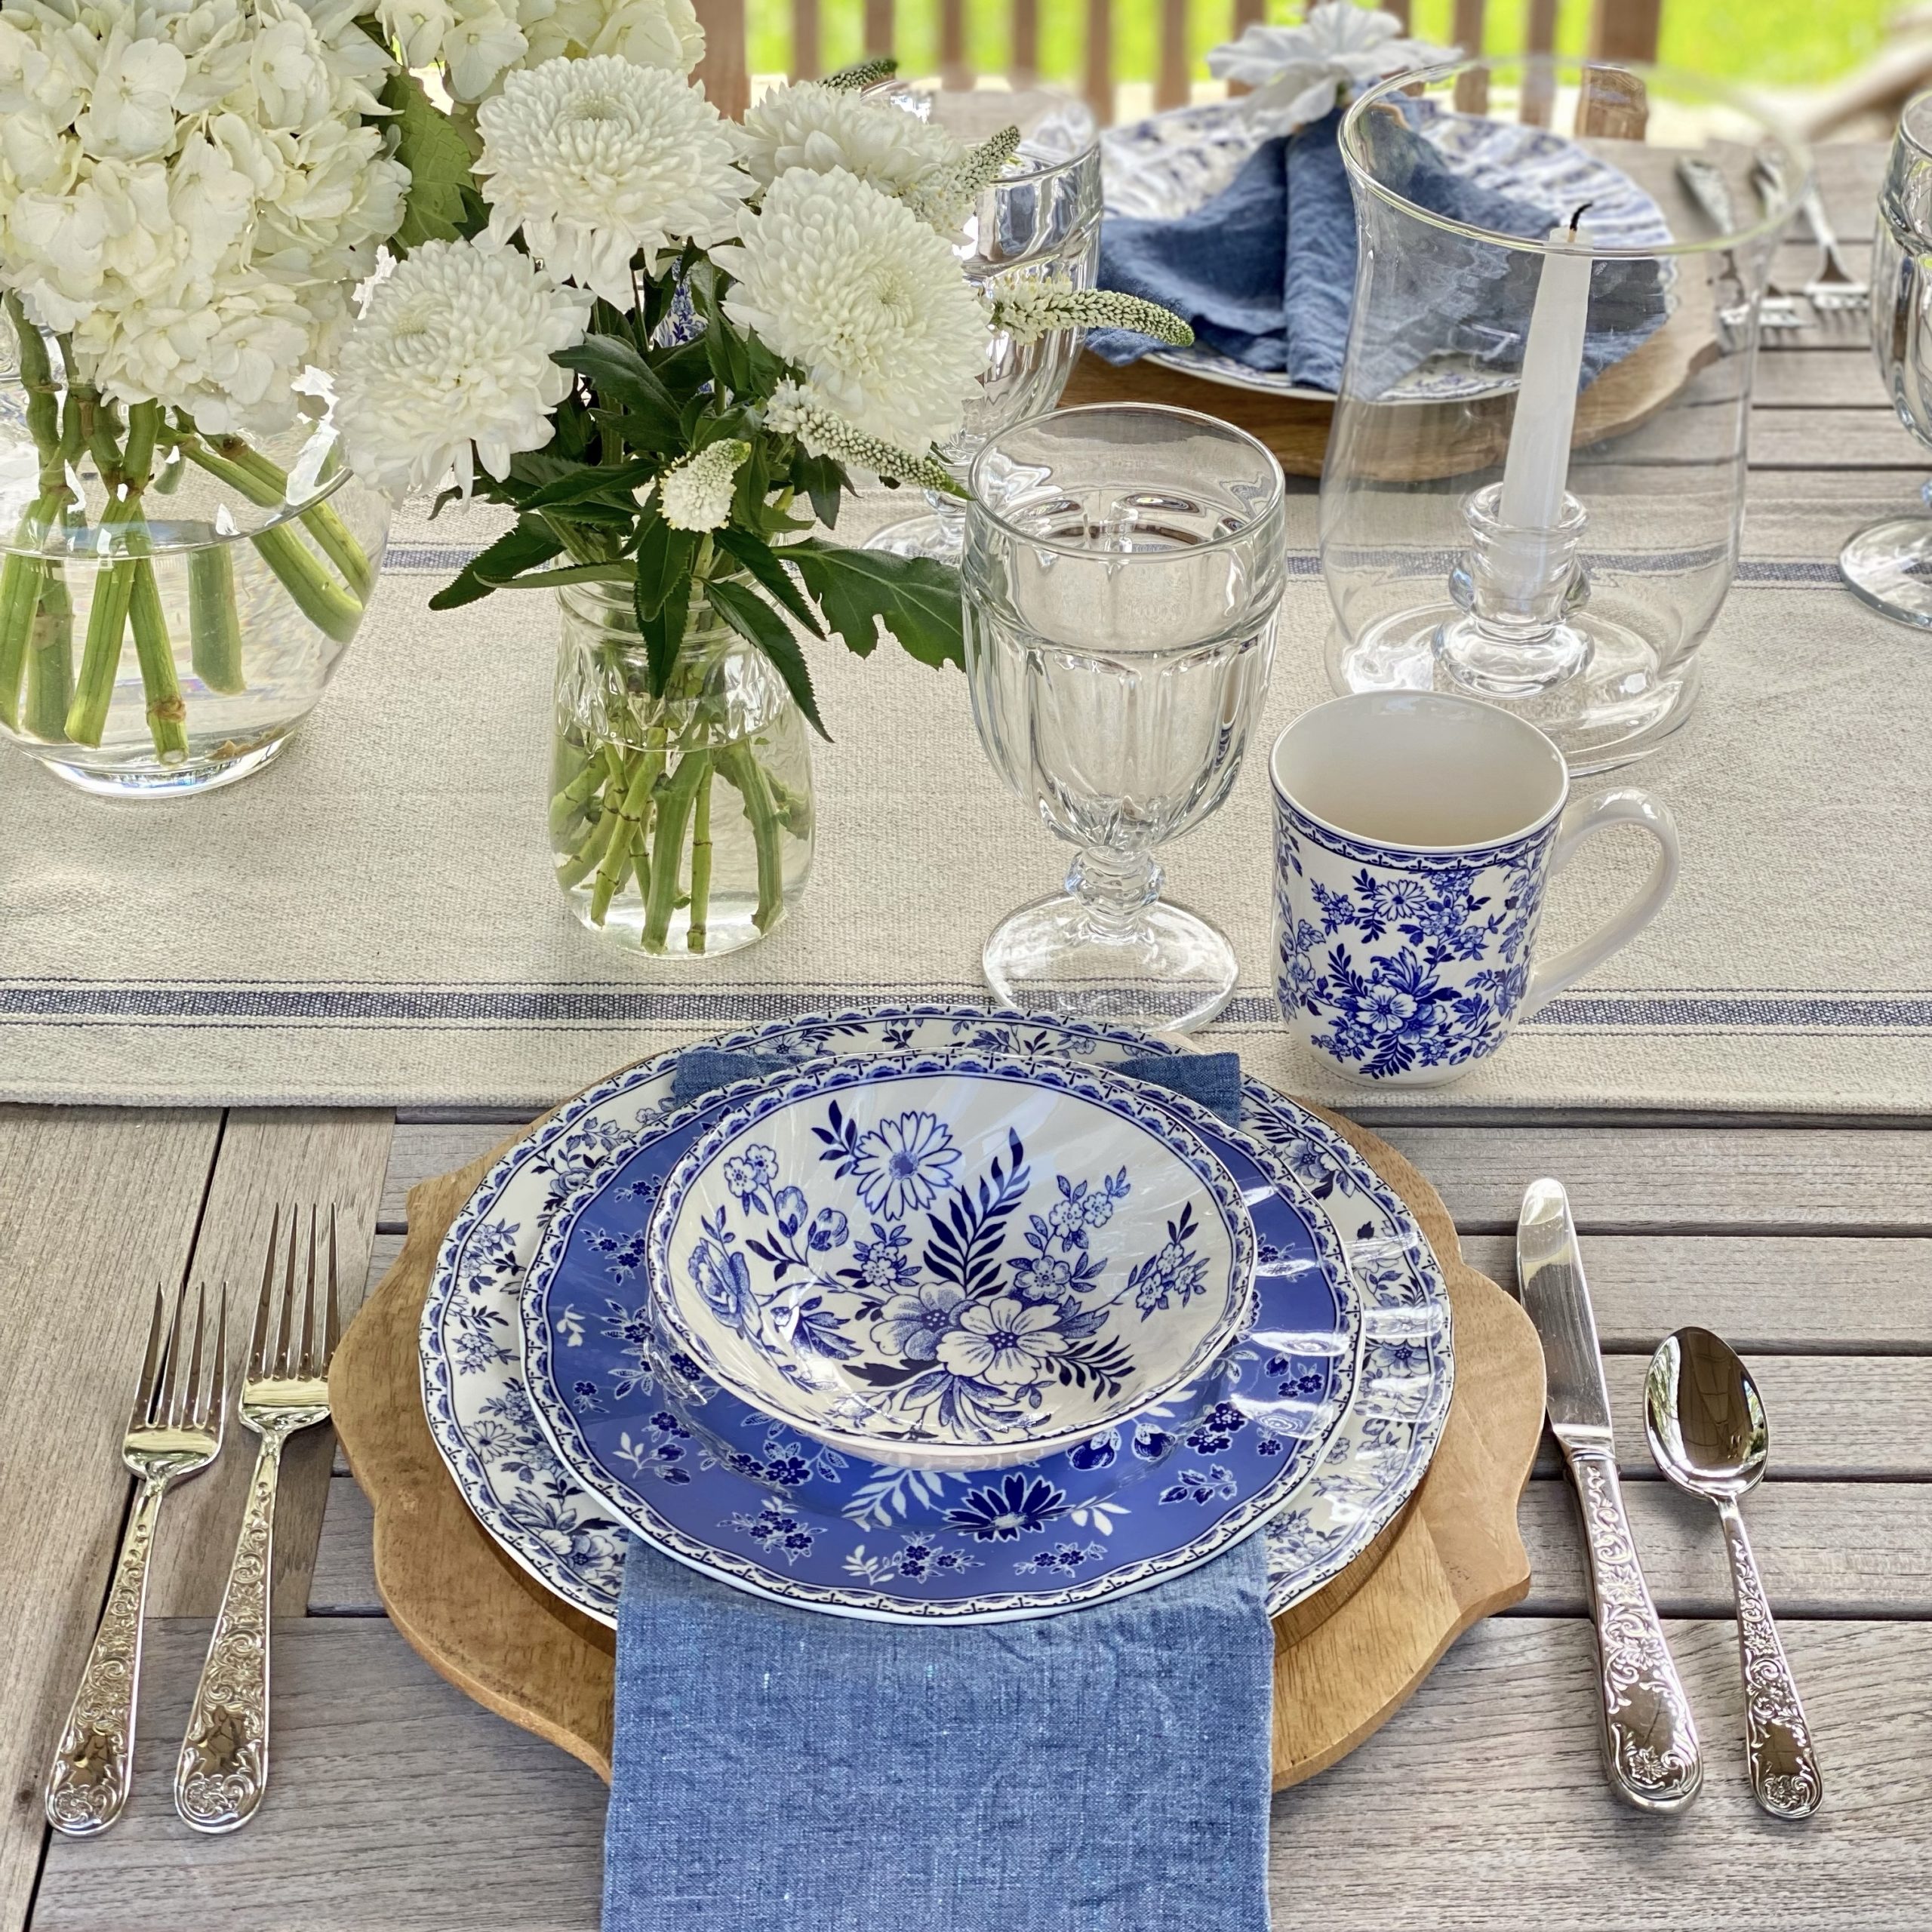 Blue and white dishes set on a wood charger with a blue linen napkin laying flat between the dinner and salad plate. There are white flowers in a jar off to the side.